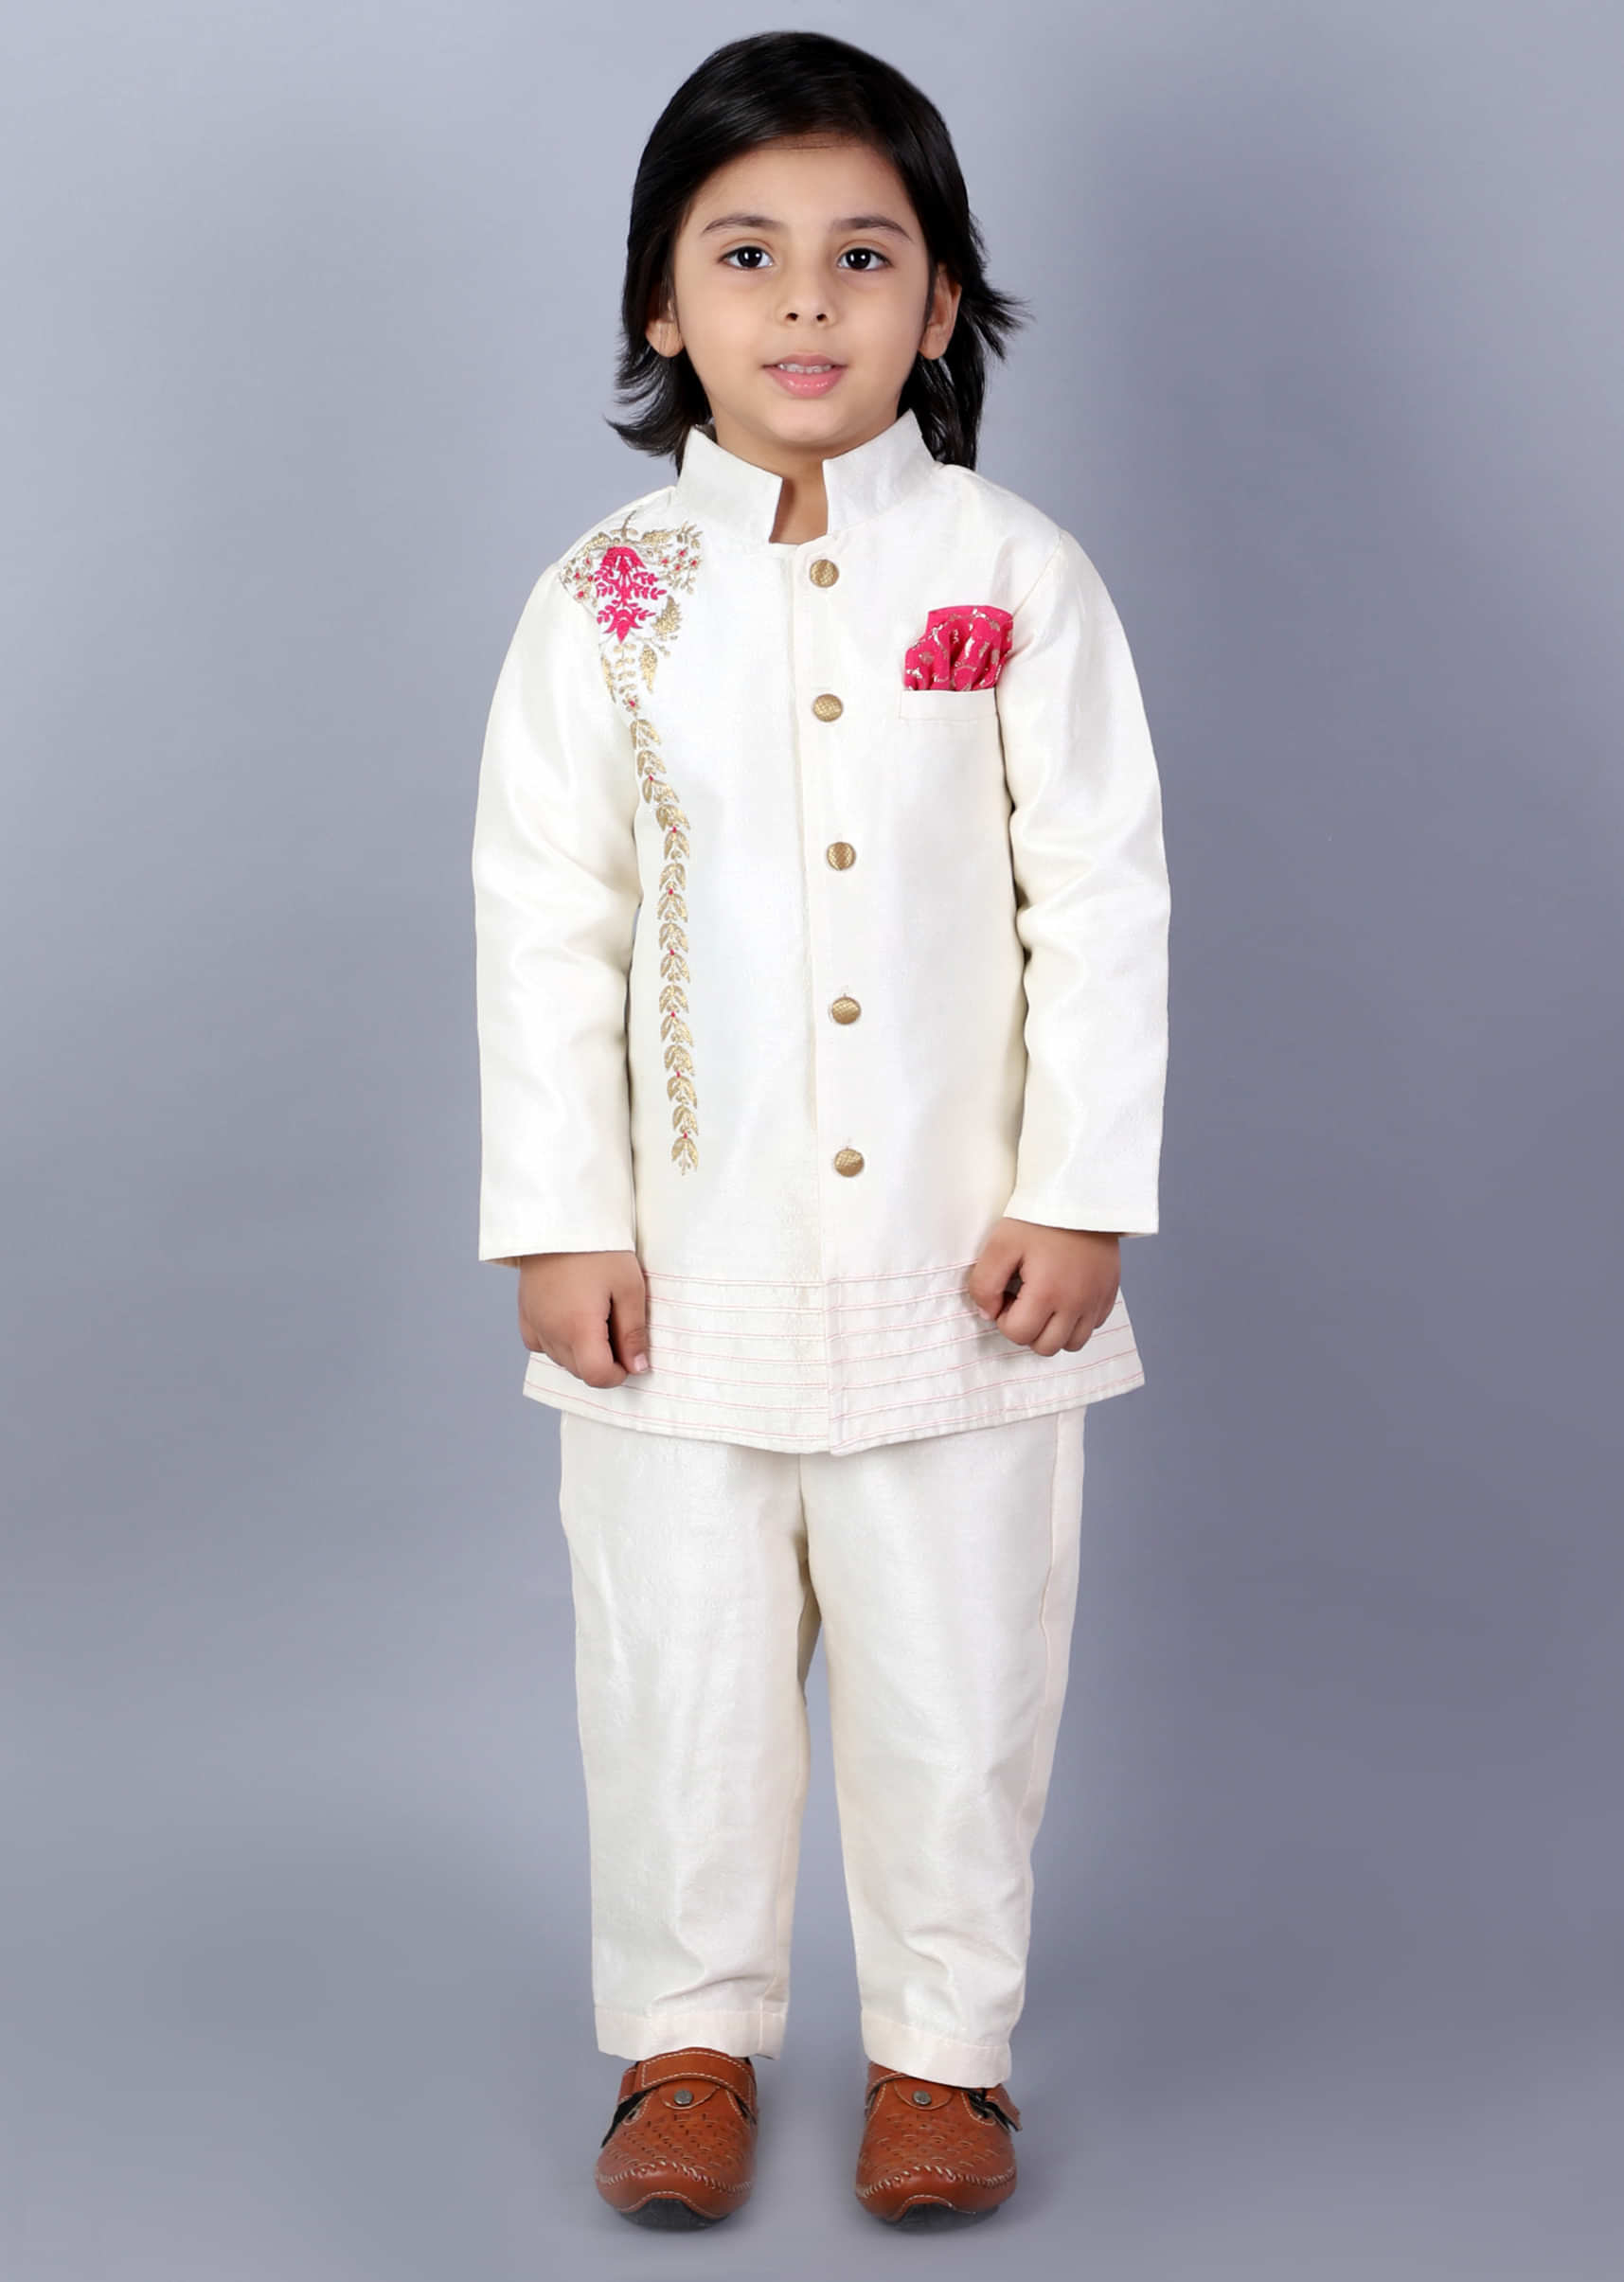 Kalki Boys Off White Bandhgala Set In Raw Silk With Embroidery Detailing And Pink Pocket Square